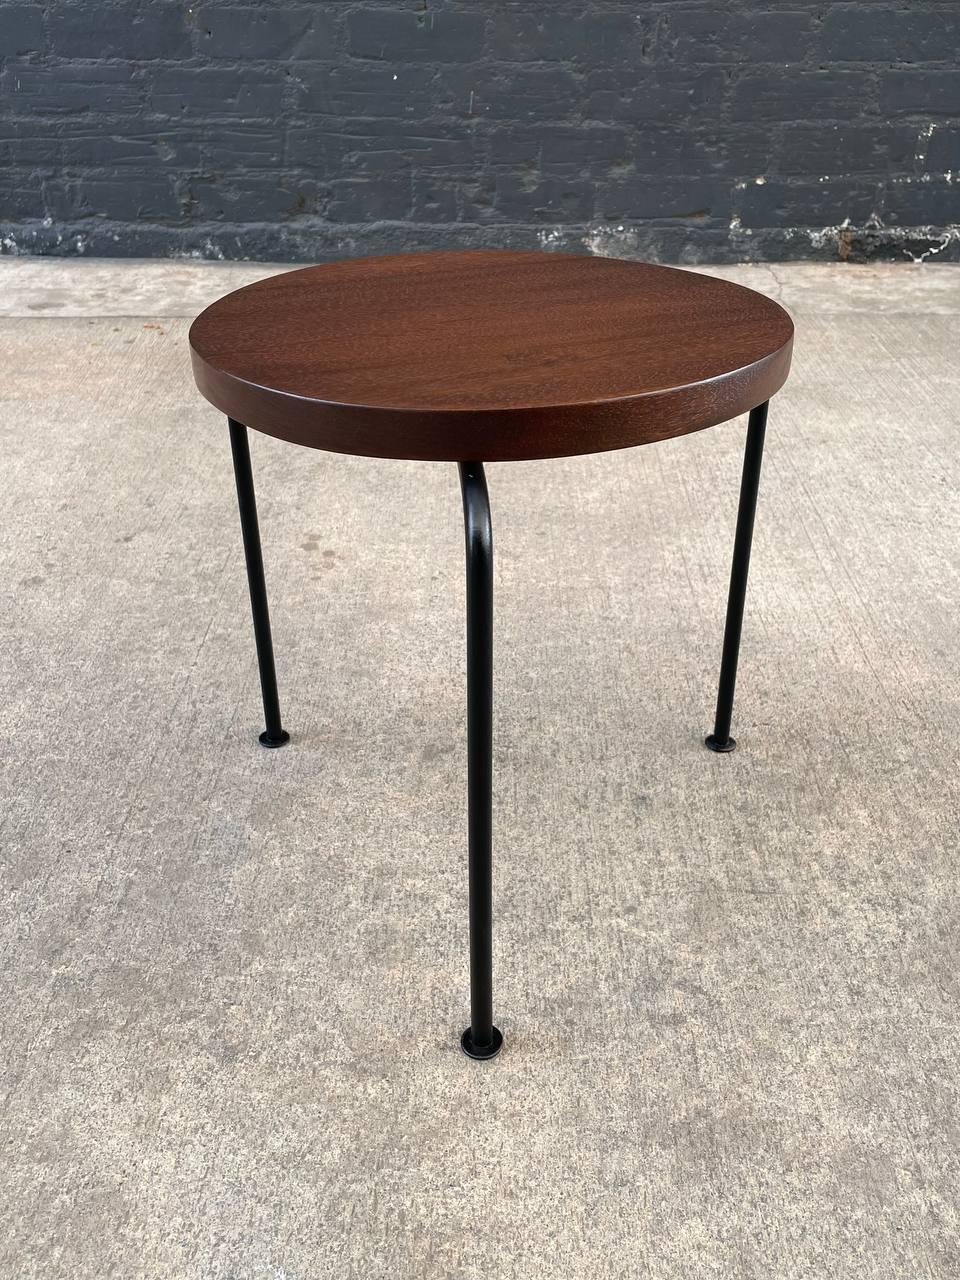 American Newly Refinished - Mid-Century Modern & Iron Tri-Leg Side Table